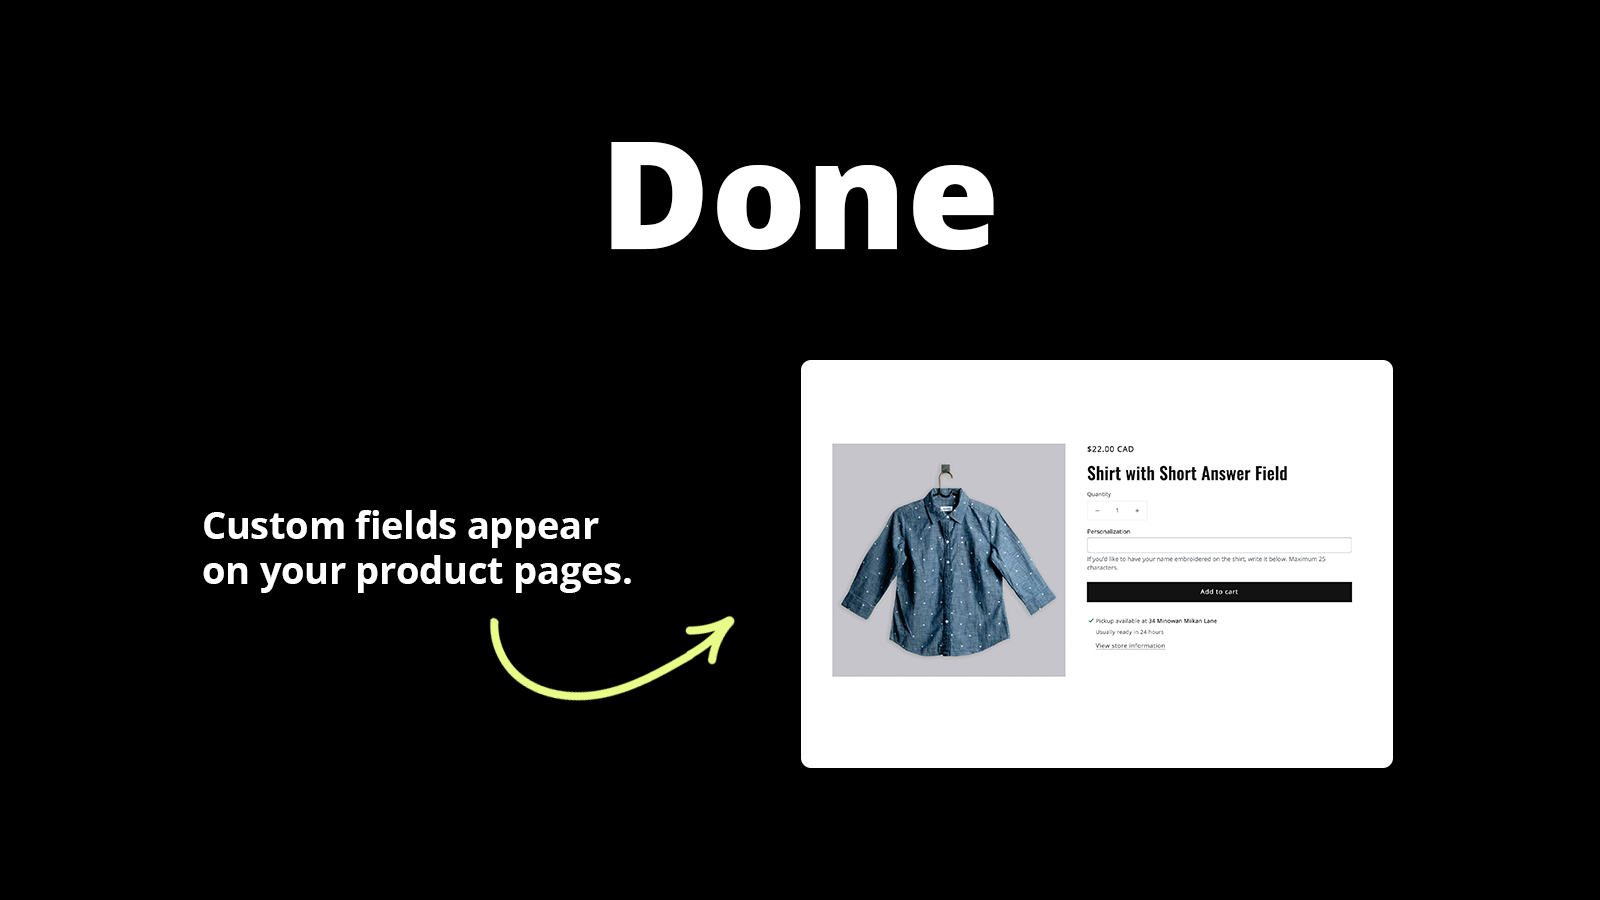 Done. Custom fields appear on your product pages.